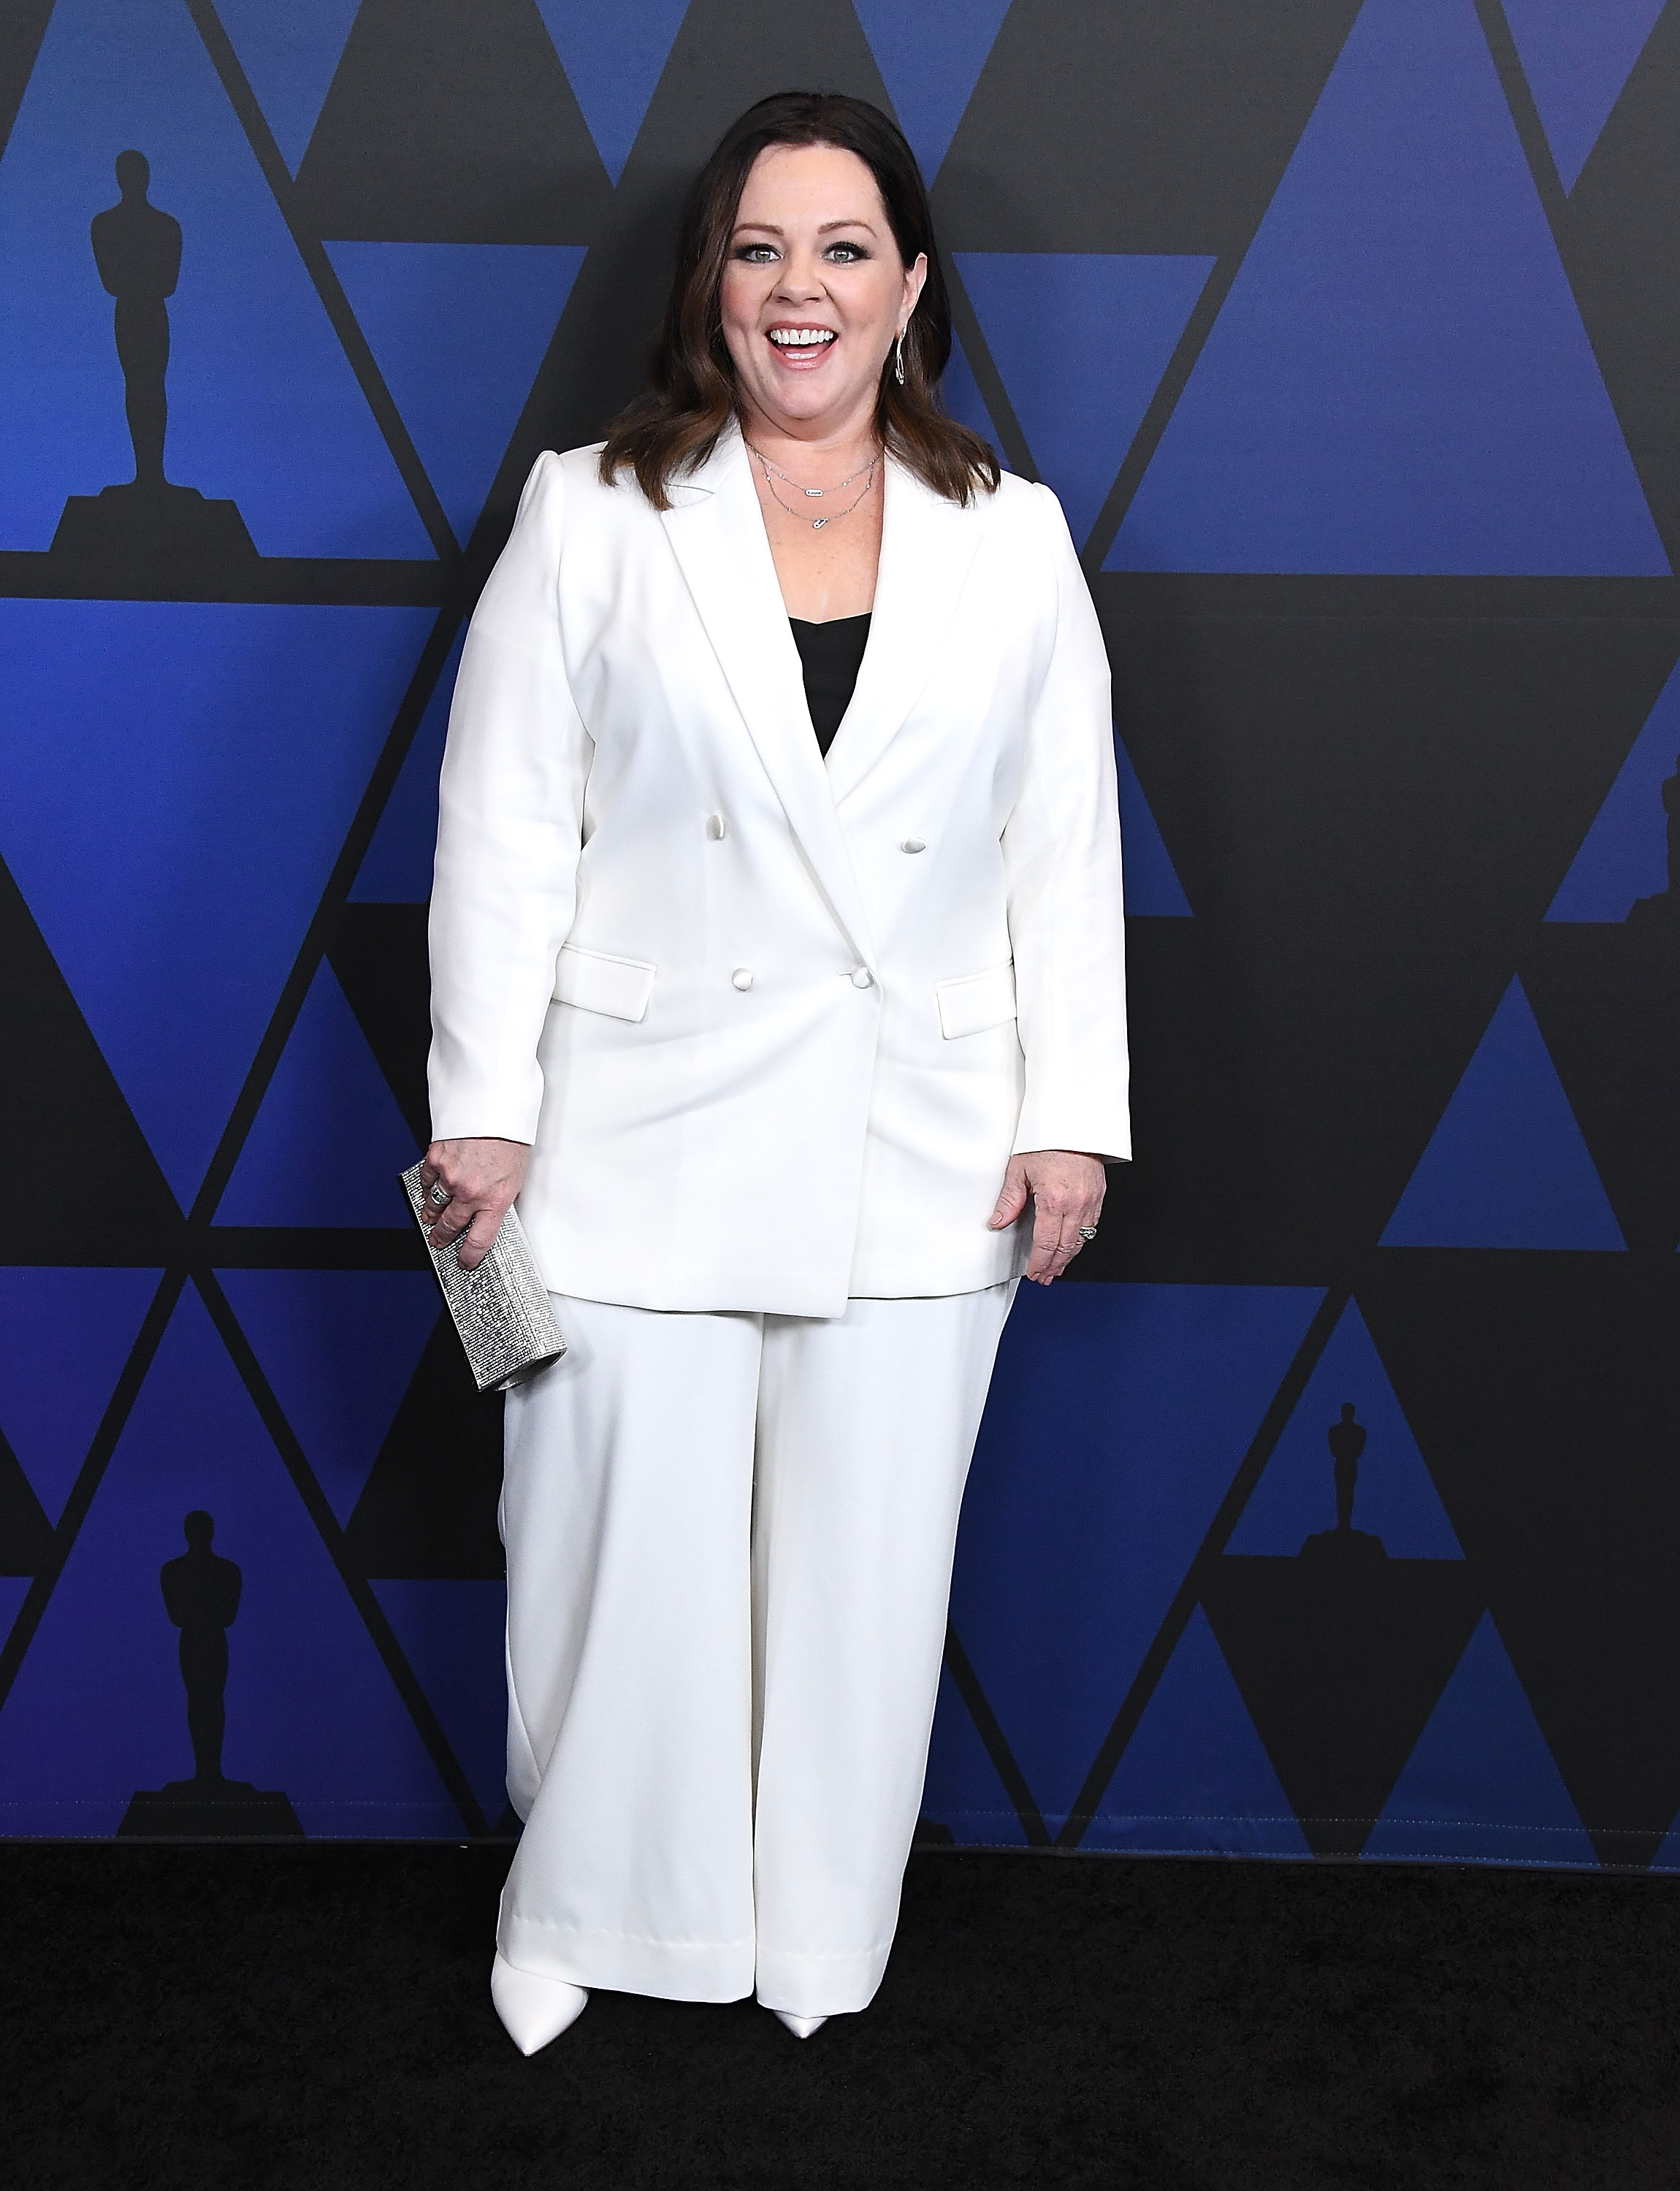 Melissa McCarthy at the Academy Of Motion Picture Arts And Sciences' 10th Annual Governors Awards on November 18, 2018 in Hollywood, California | Source: Getty Images